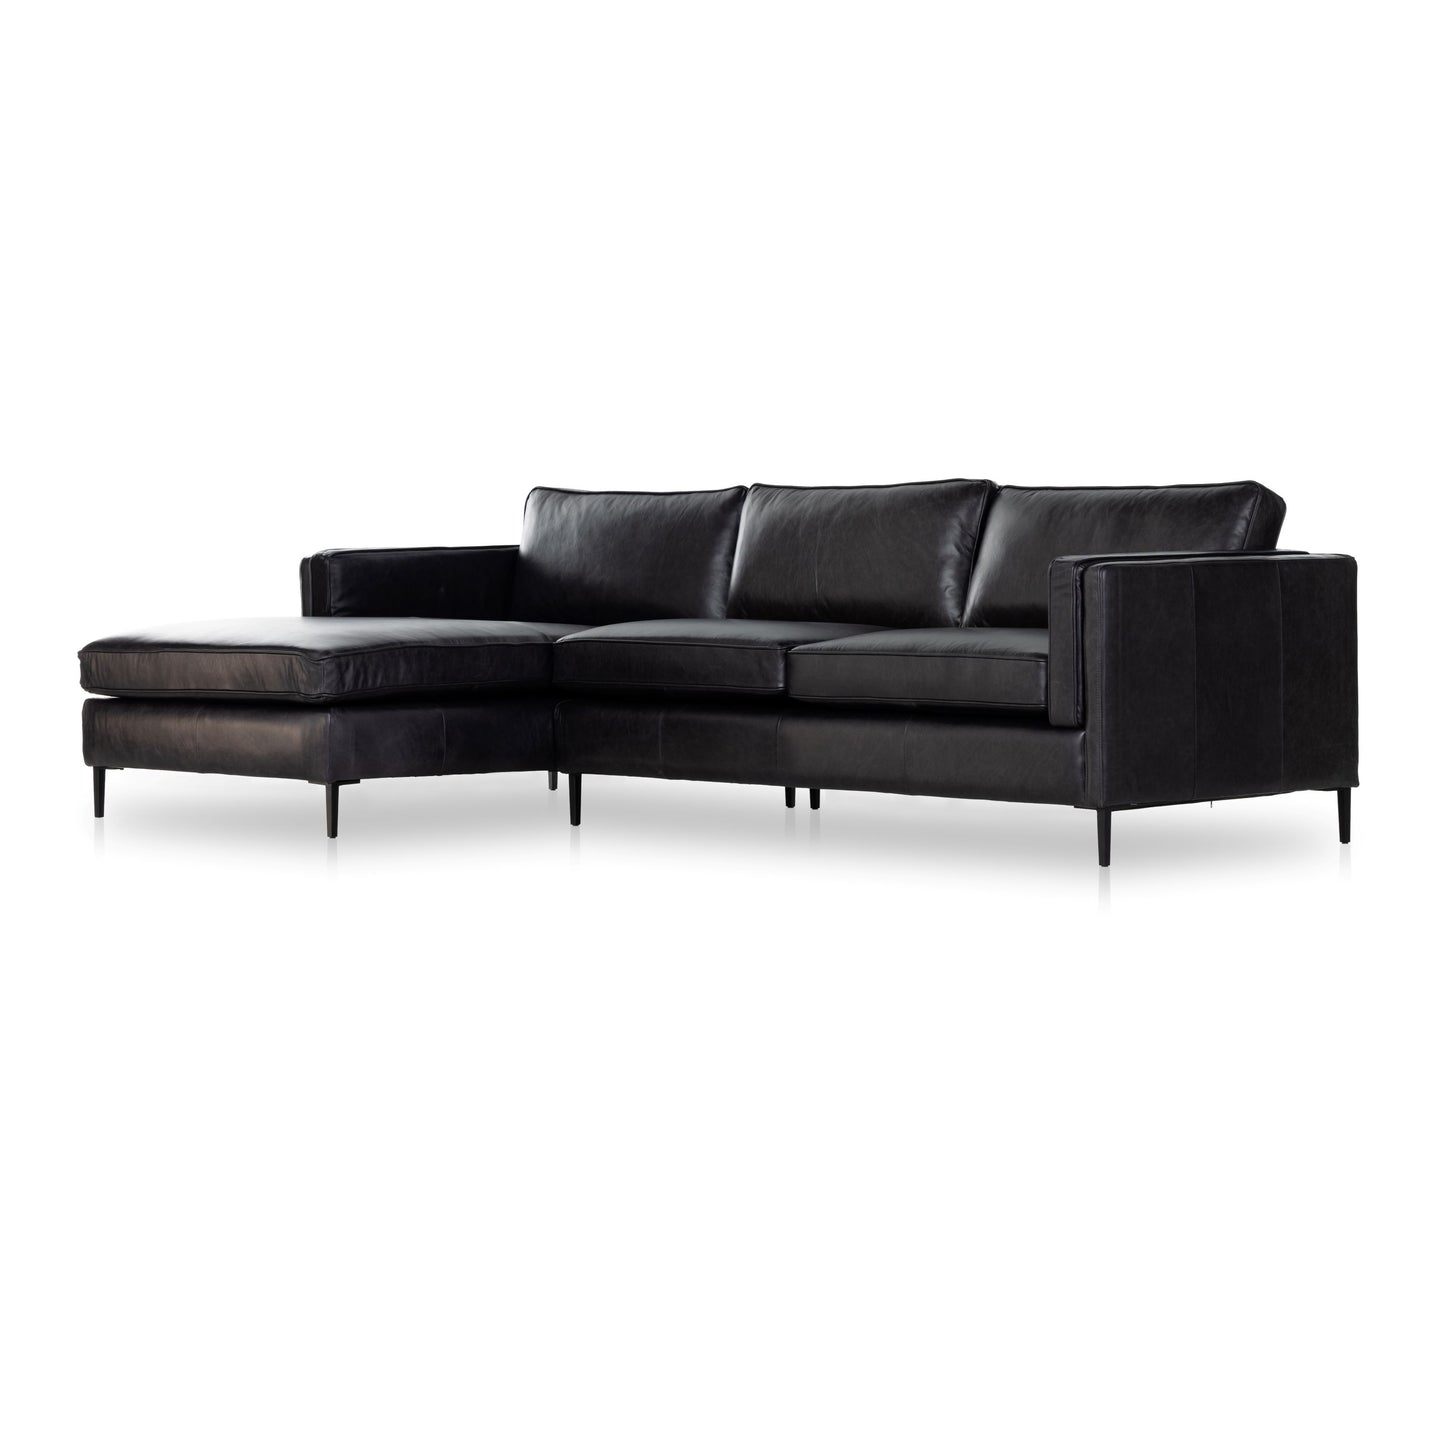 Load image into Gallery viewer, Emery 2pc Sectional Sonoma Black / Left FacingSectiona Sofa Four Hands  Sonoma Black Left Facing  Four Hands, Mid Century Modern Furniture, Old Bones Furniture Company, Old Bones Co, Modern Mid Century, Designer Furniture, https://www.oldbonesco.com/
